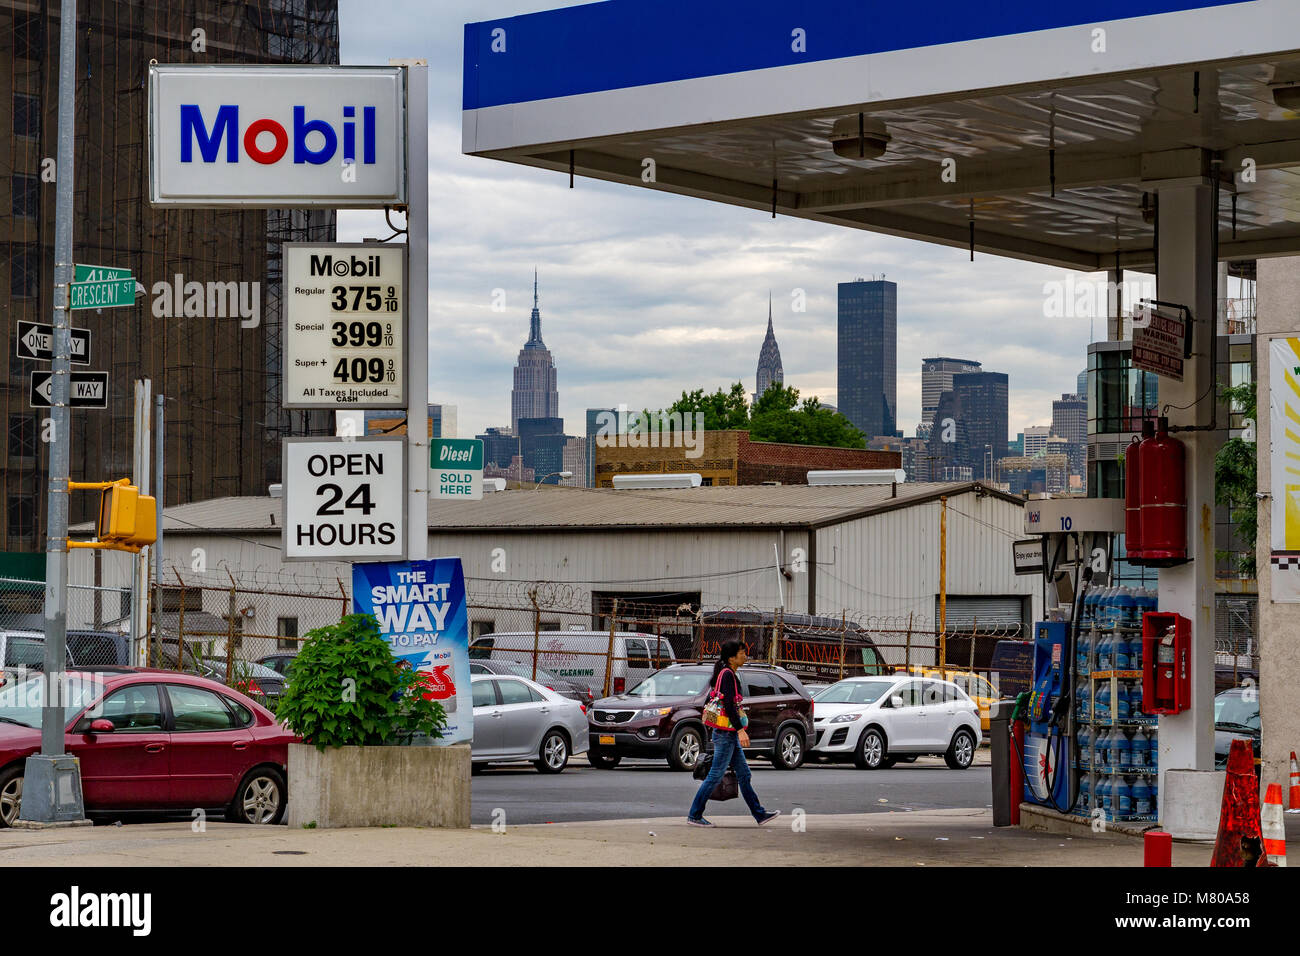 A woman walks across a petrol station forecourt of a Mobil Gas / Petrol station in Long Island City, Queens, New York Stock Photo